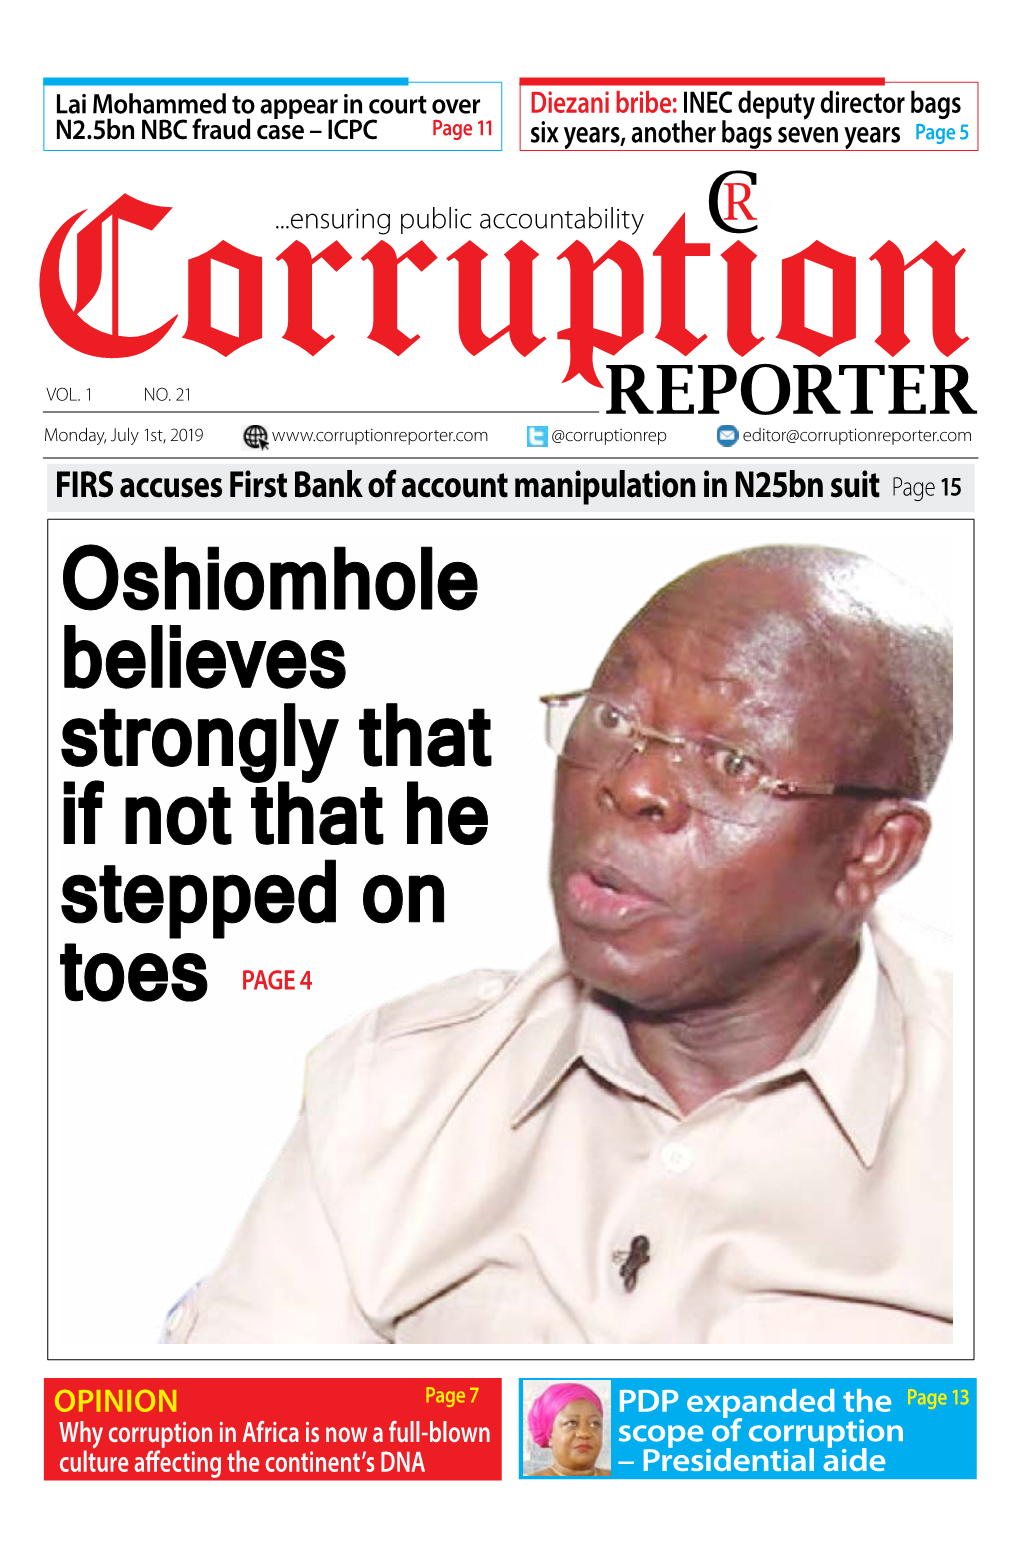 Oshiomhole Believes Strongly That If Not That He Stepped on Toes PAGE 4